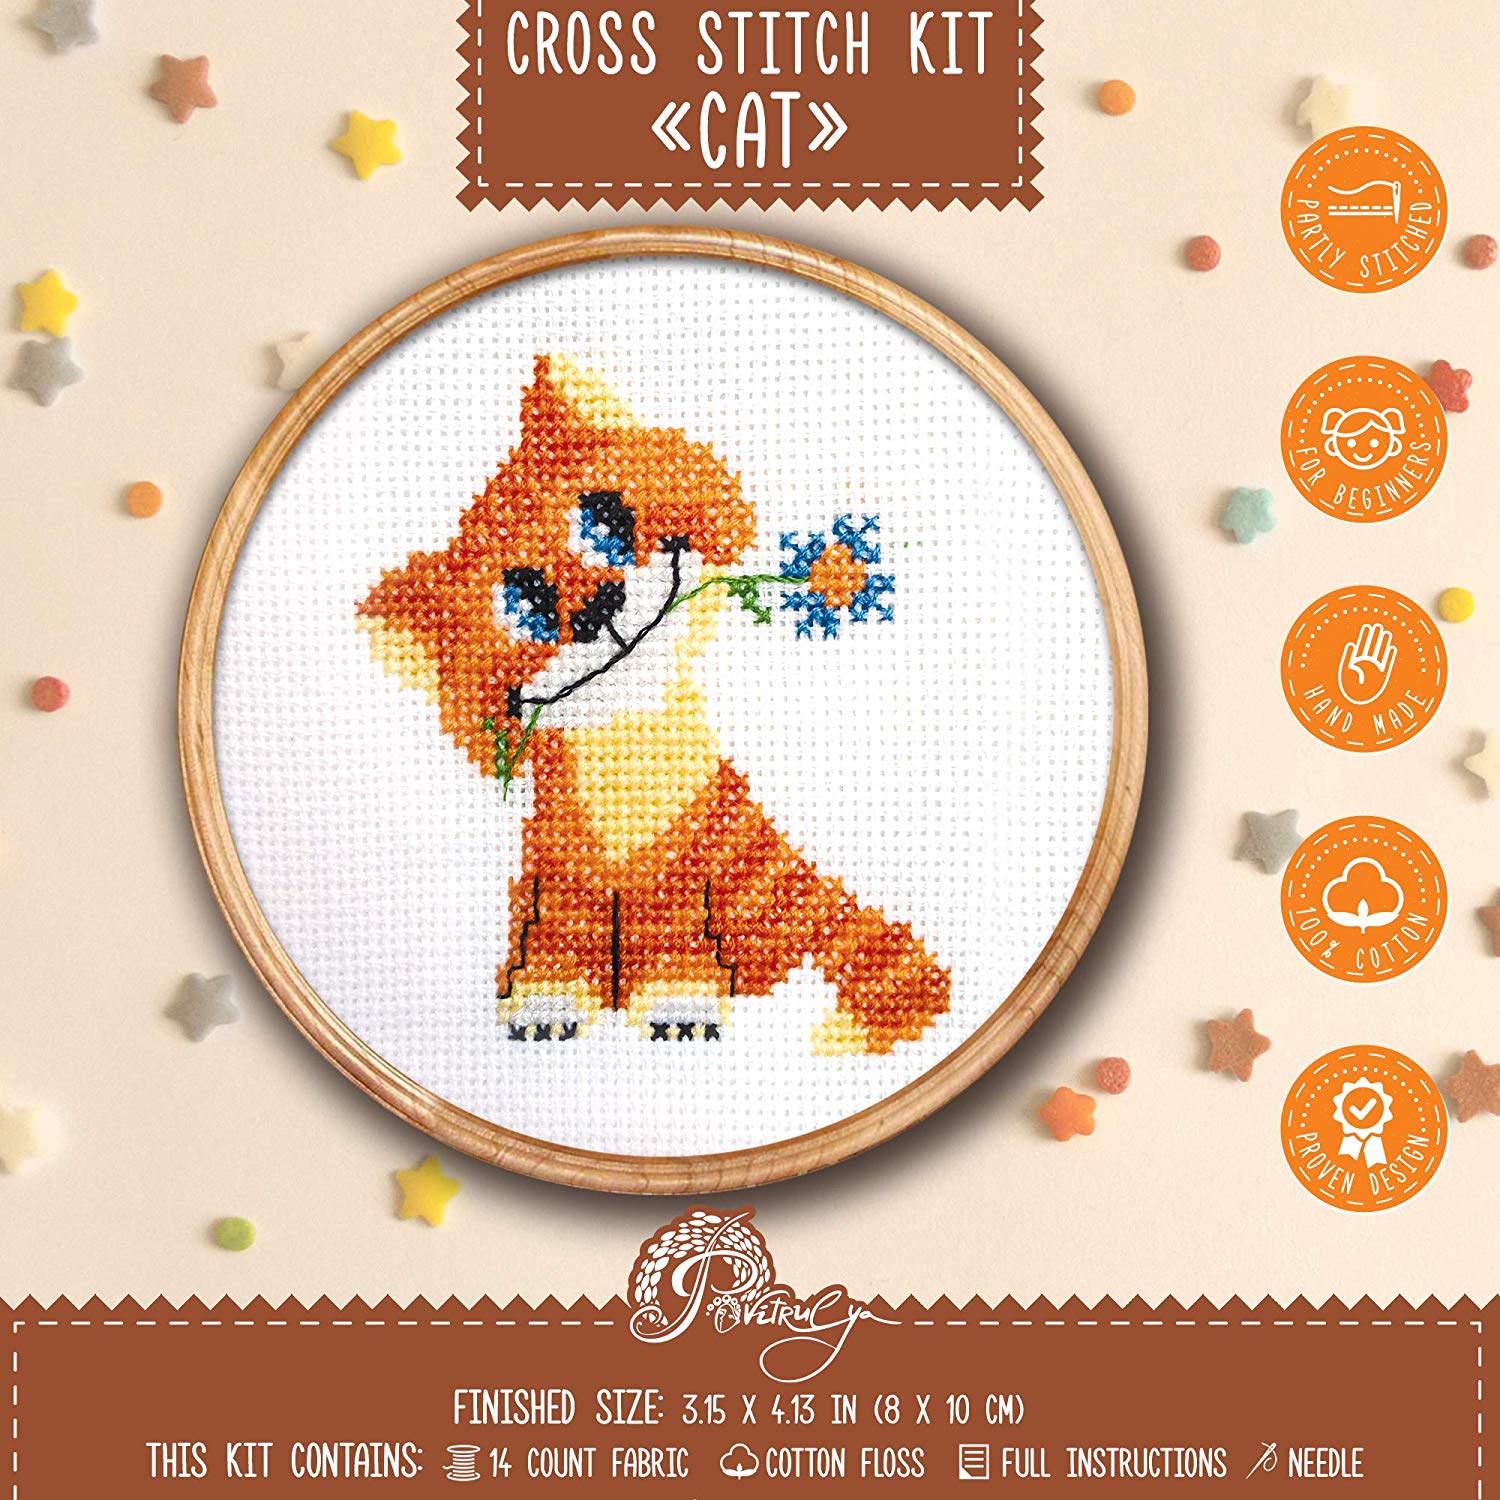 Cat Cross Stitch Kit for Beginners by Povitrulya - Sew Homegrown